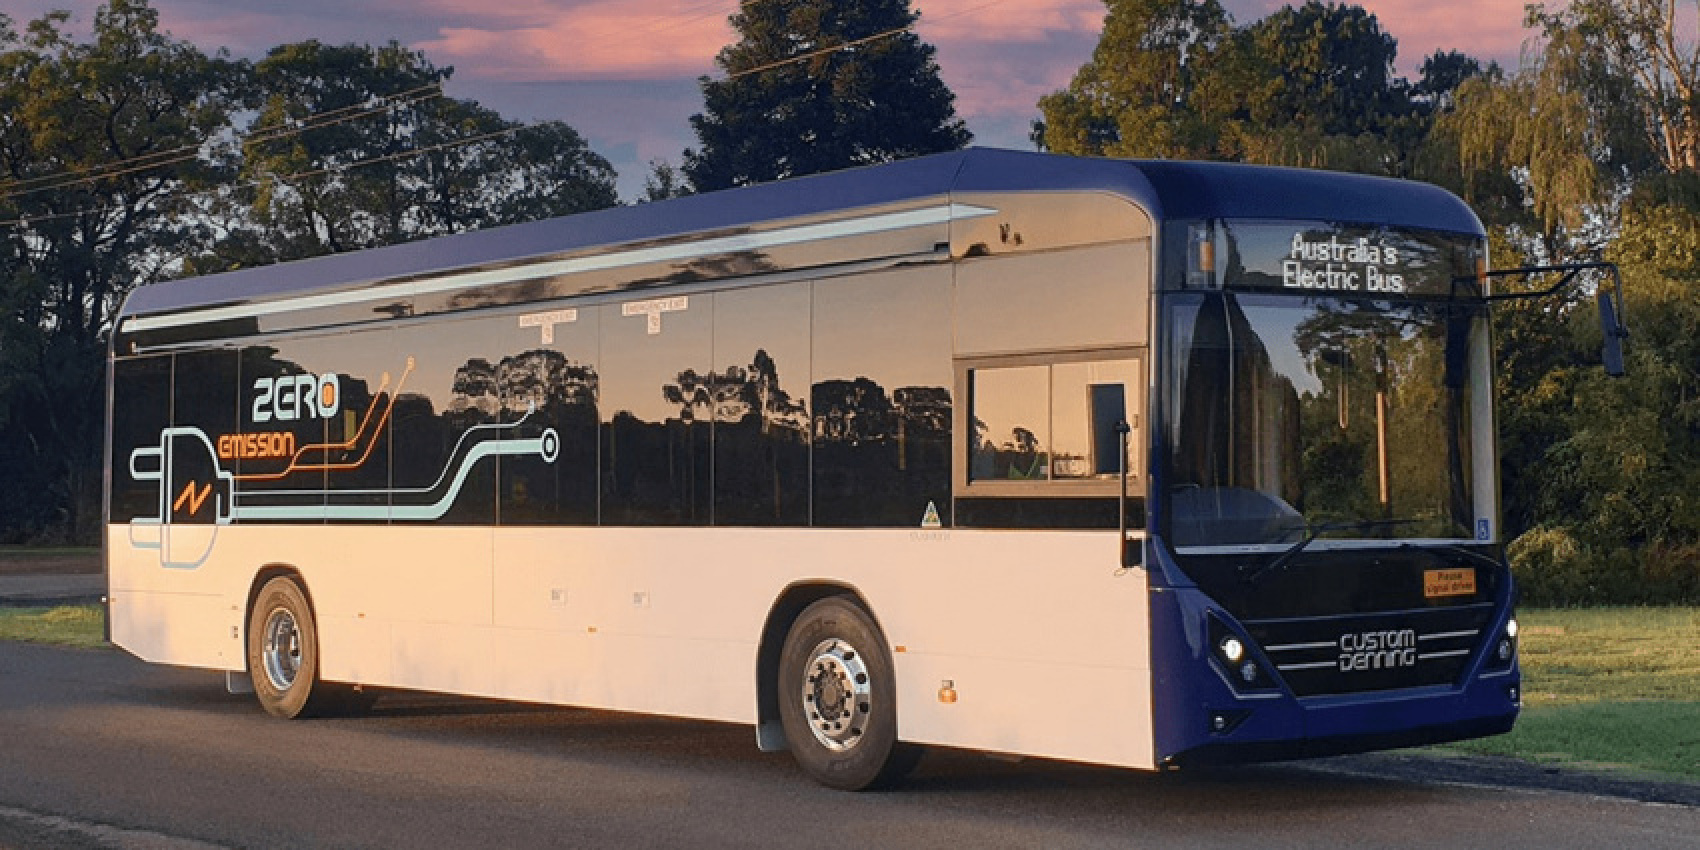 autos, cars, electric vehicle, fleets, australia, custom denning, electric buses, new south wales, sydney, sydney orders 79 e-buses from custom denning